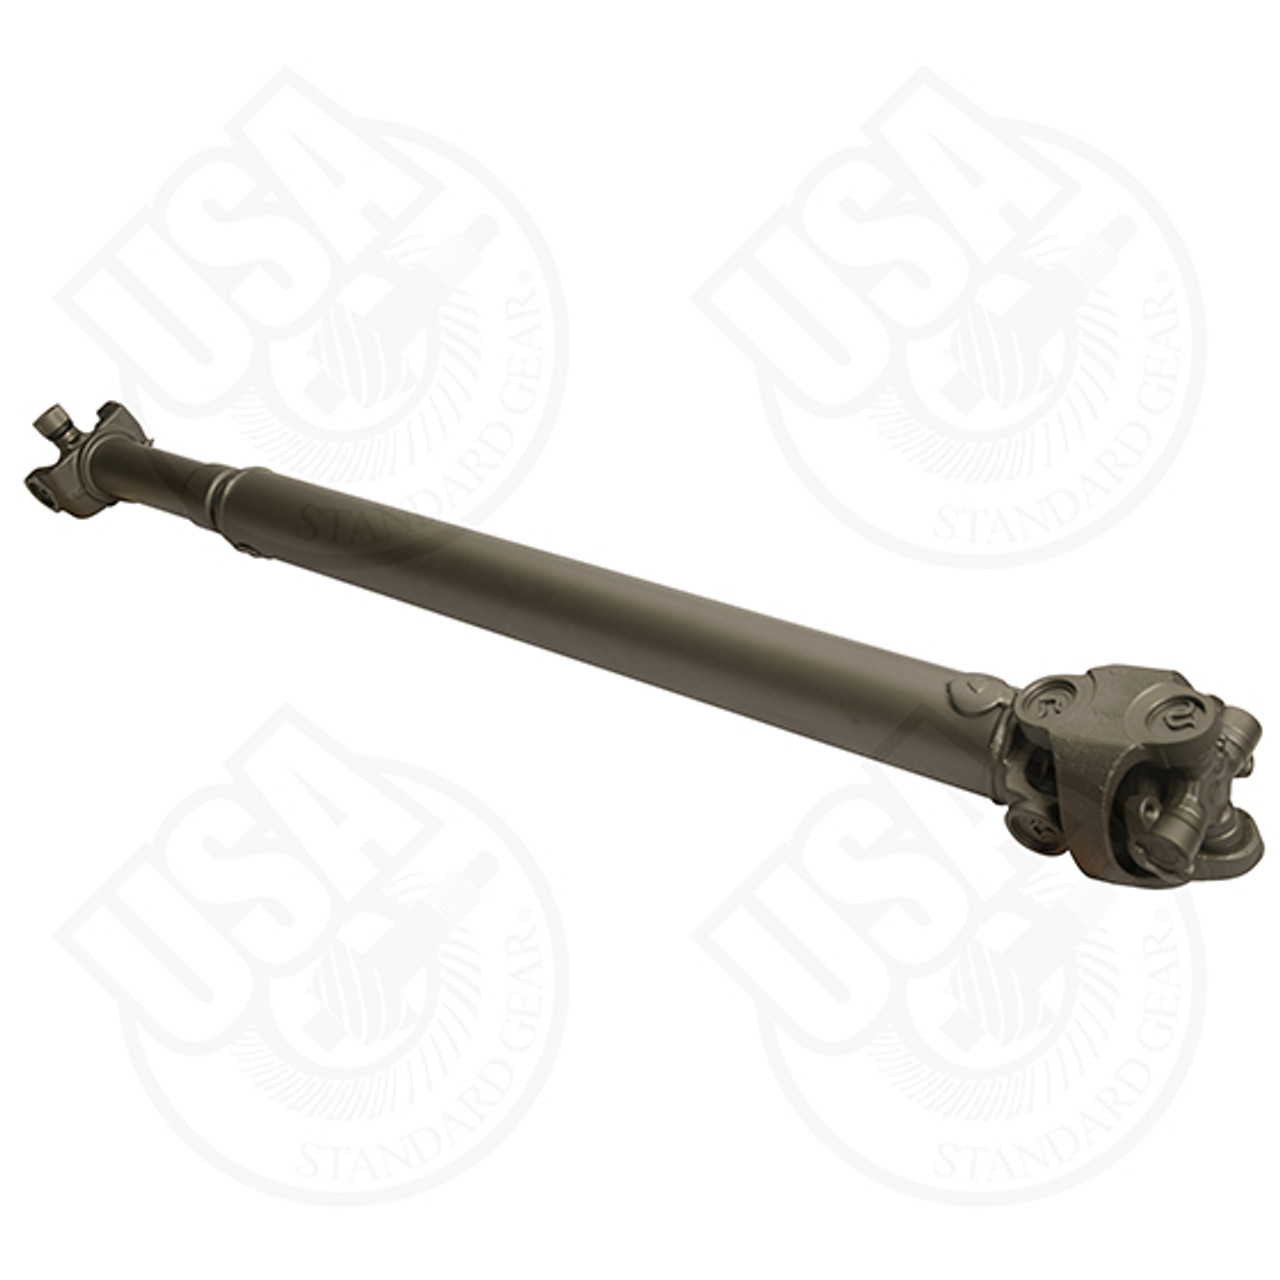 NEW USA Standard Front Driveshaft for F150, 35" Center to Center